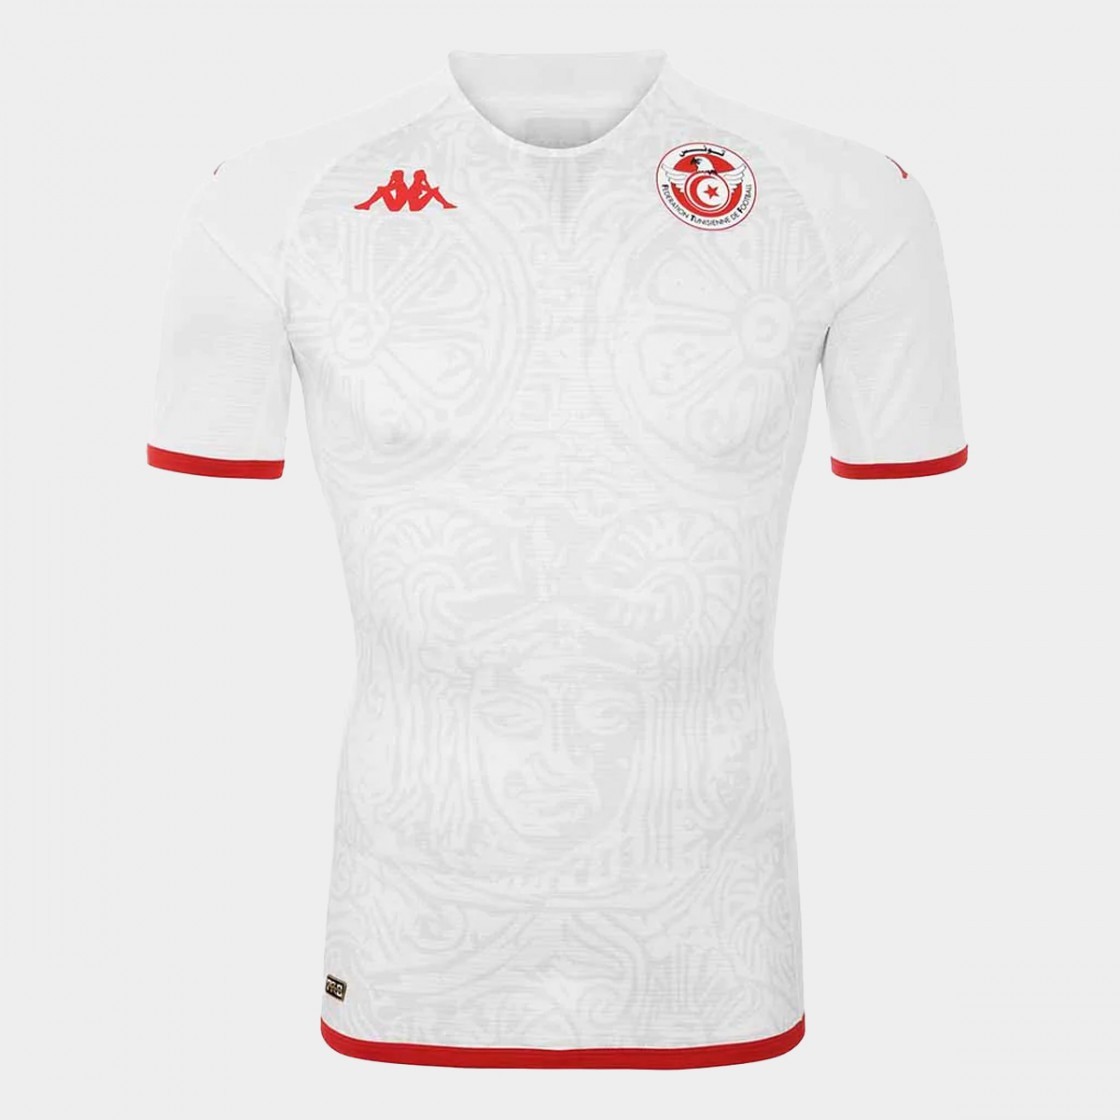 Kappa Maillot Equipe Nationale Adulte Tunisie 2022